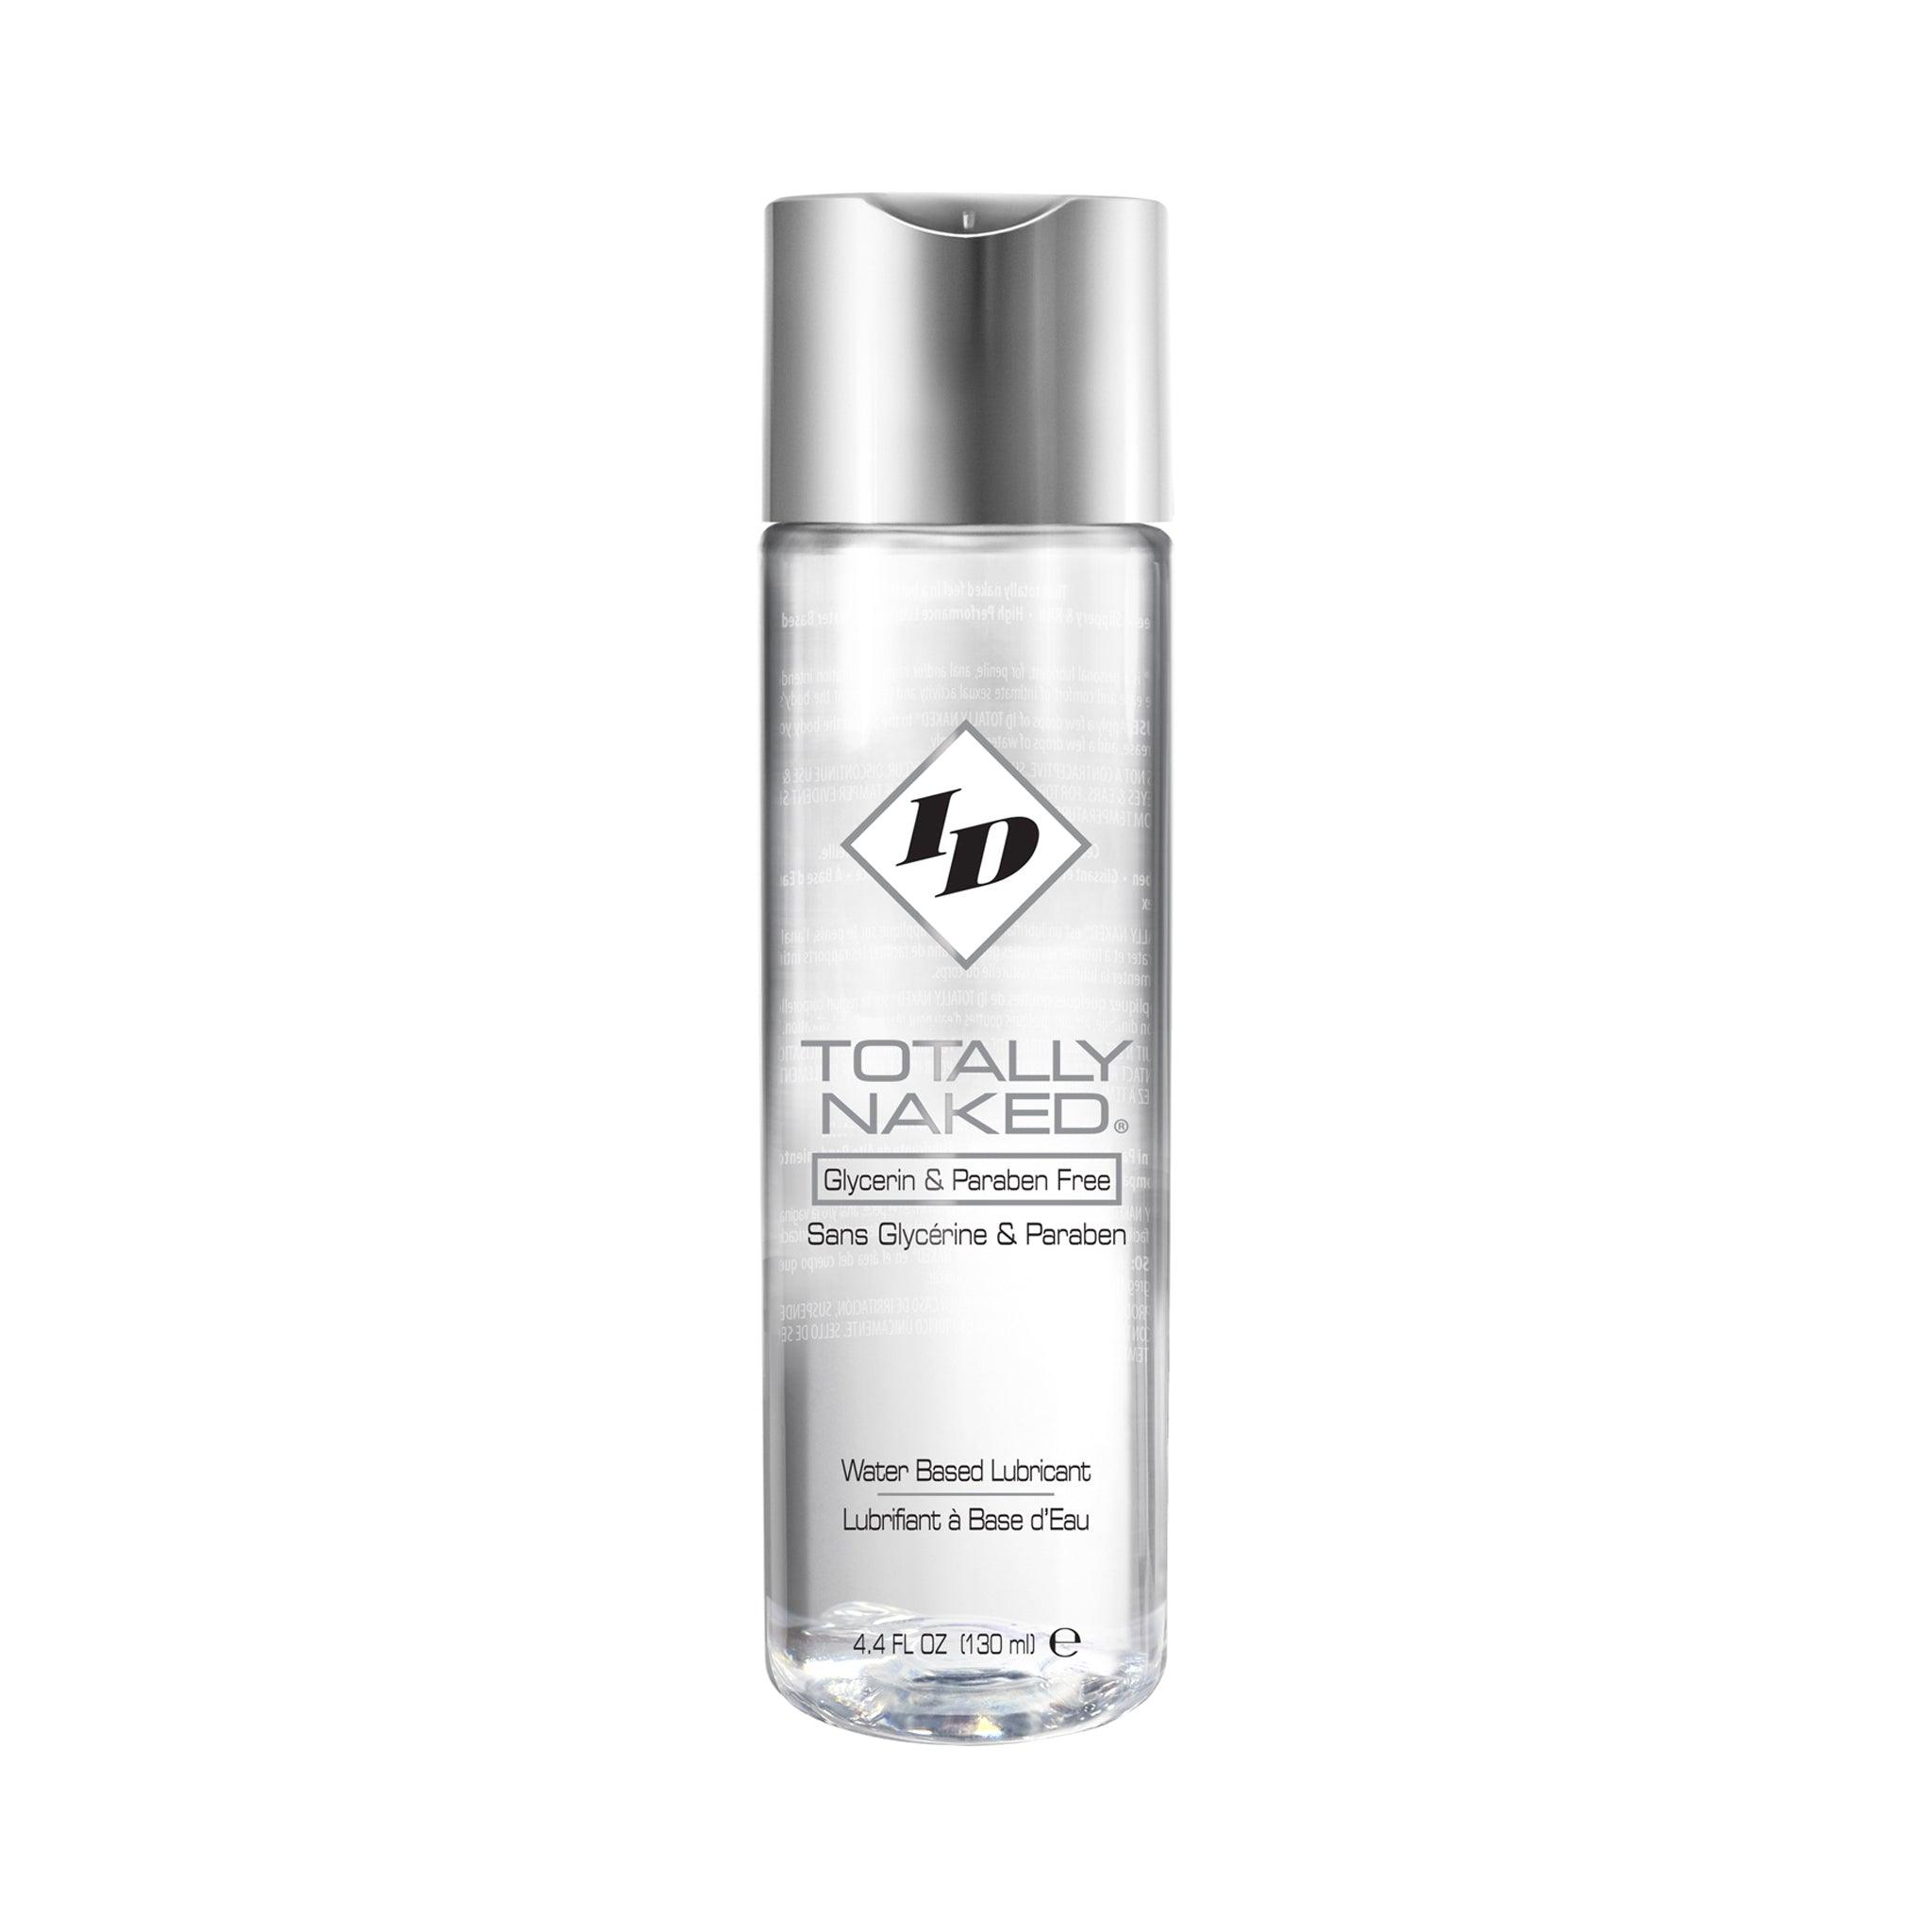 ID Totally Naked - Glycerin & Paraben Free Water-Based Lubricant 4.4 oz (130 mL) - CheapLubes.com